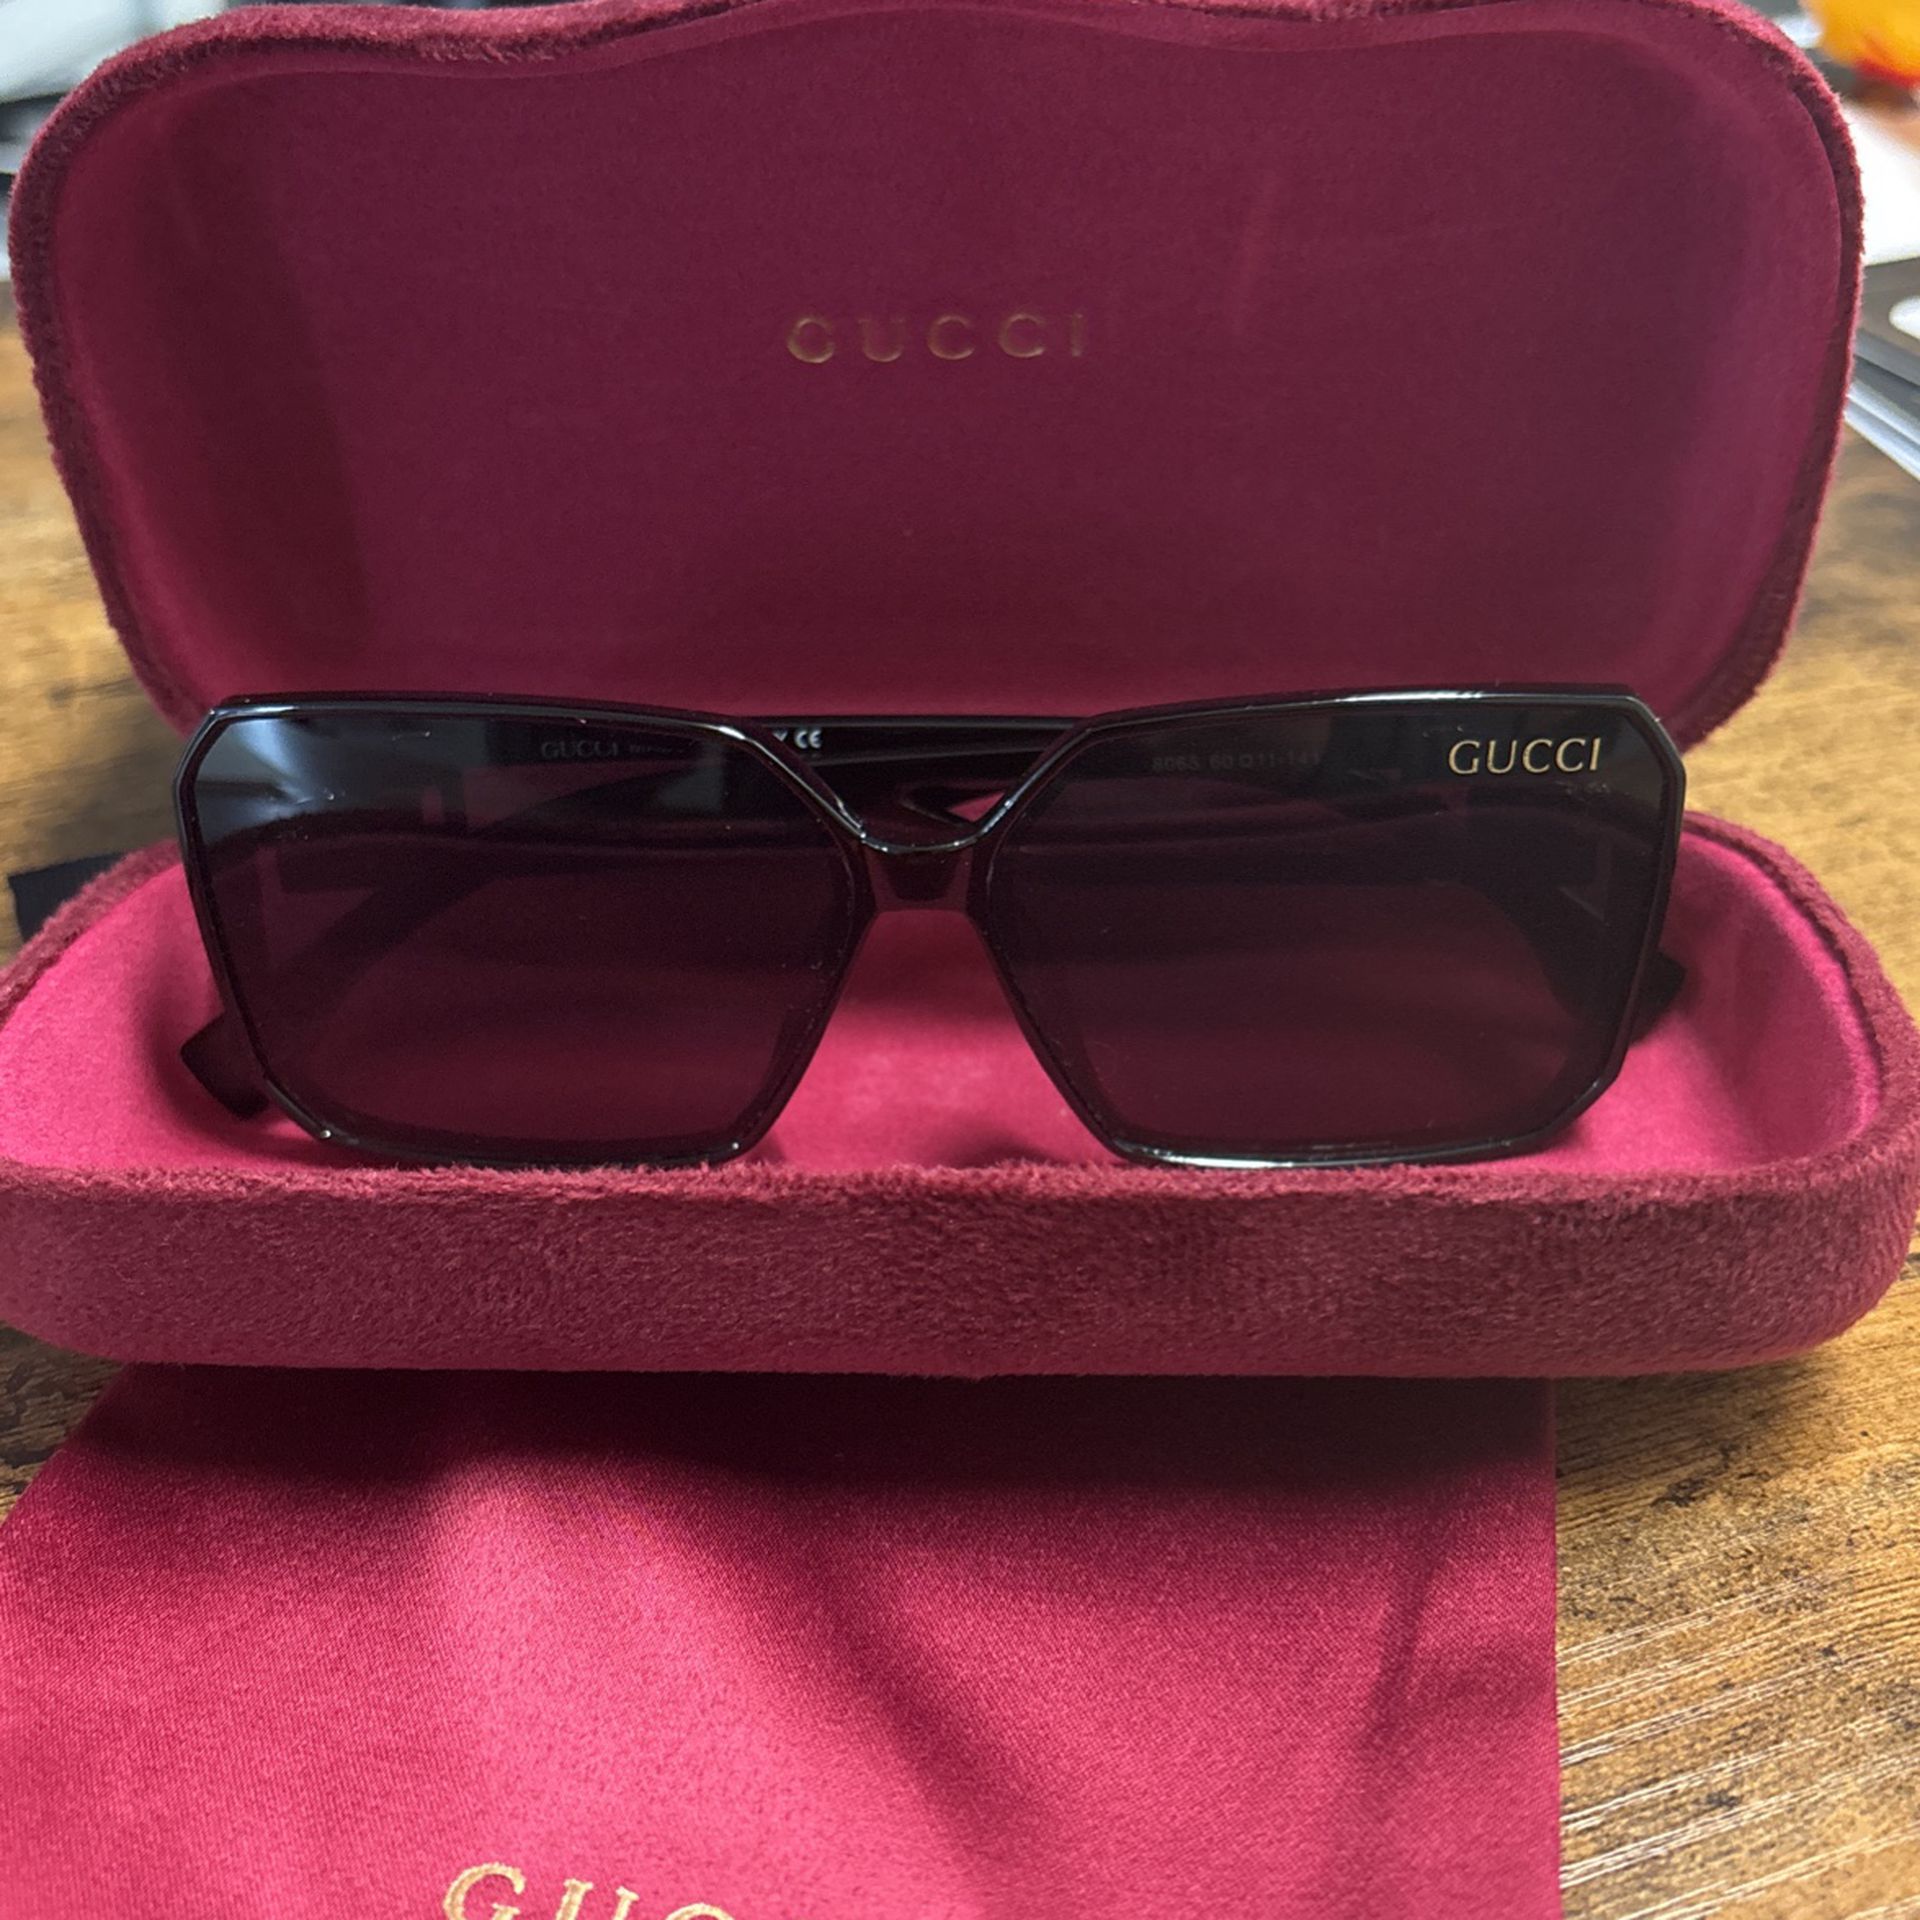 Black Gucci Sunglasses AUTHENTIC WITH ORIGINAL BOX AND PAPERS 